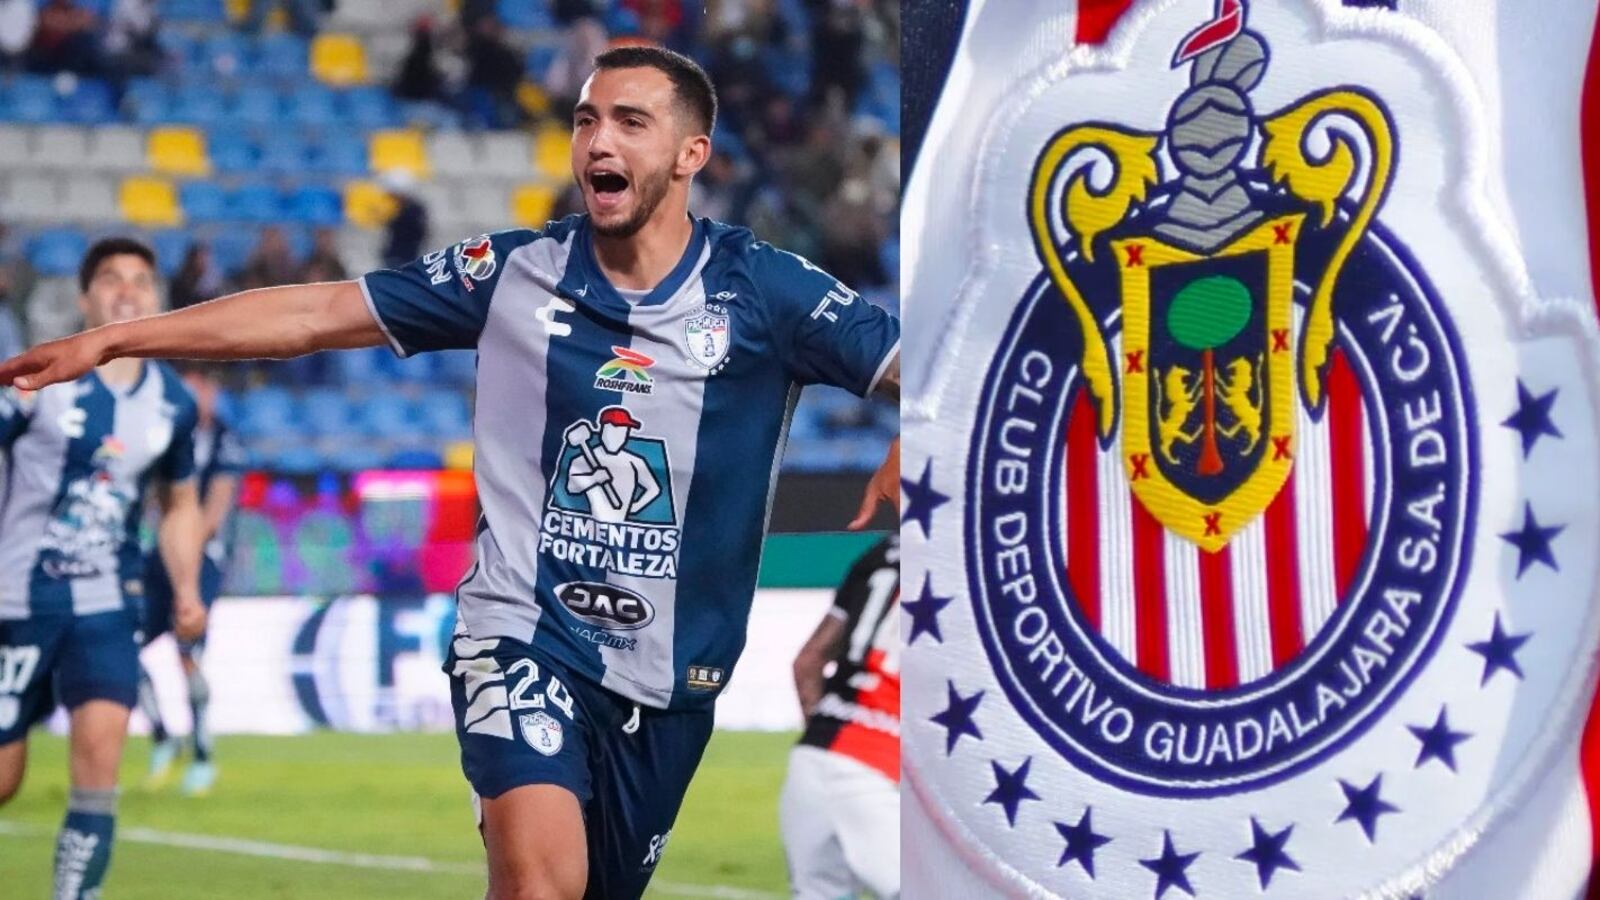 While they ask for 6 million from Oporto for Chavez, the money they were asking for from Chivas